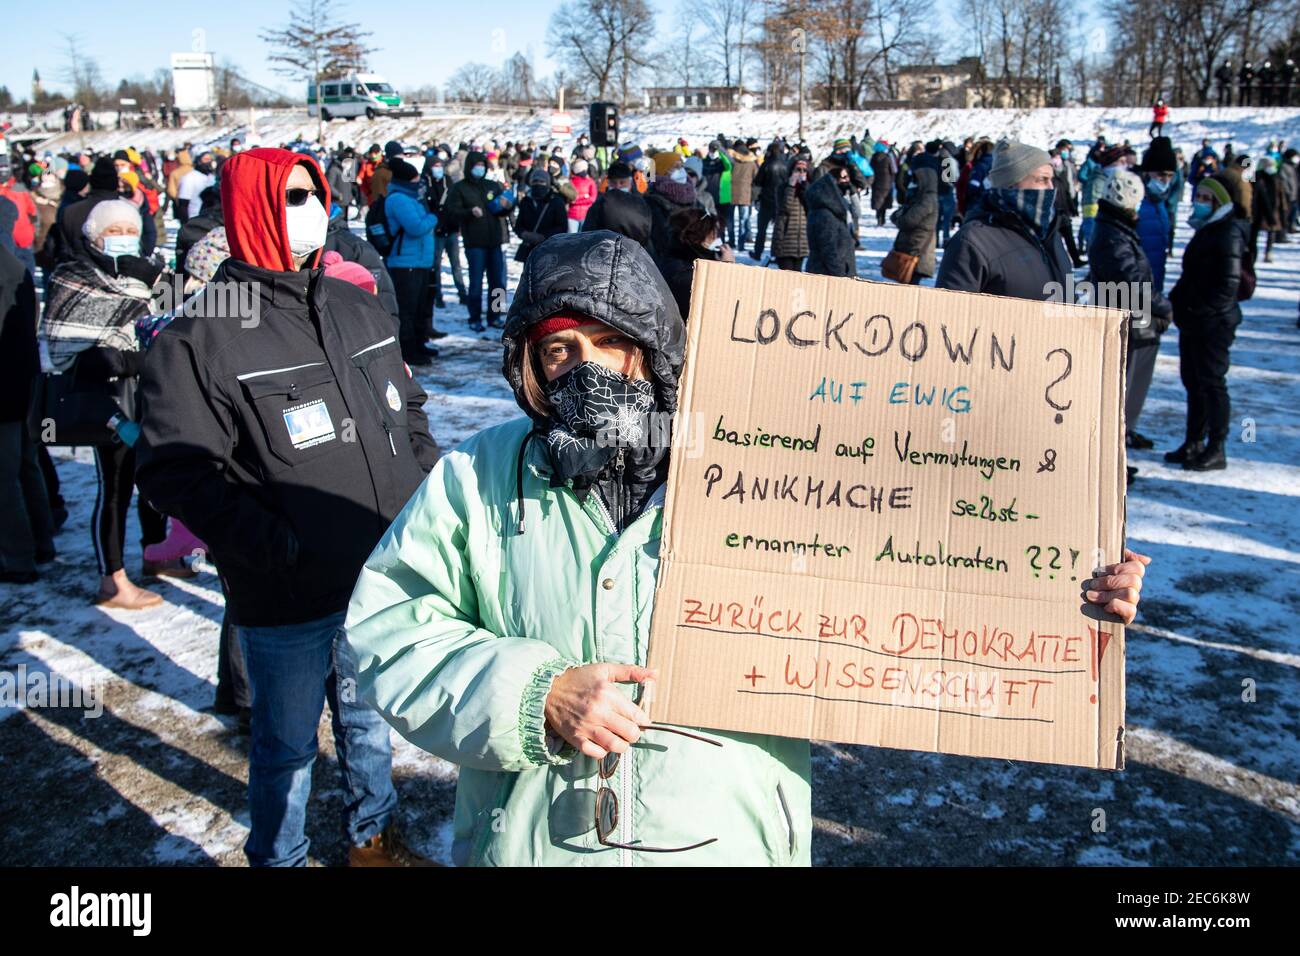 Rosenheim, Germany. 13th Feb, 2021. A demonstrator carries a sign reading 'Lockdown forever?' at a rally with the theme 'We're educating - against overreaching government Corona measures'. Based on conjecture & scare tactics of self-proclaimed autocrats??! Back to Democracy   Science!'. Credit: Matthias Balk/dpa/Alamy Live News Stock Photo